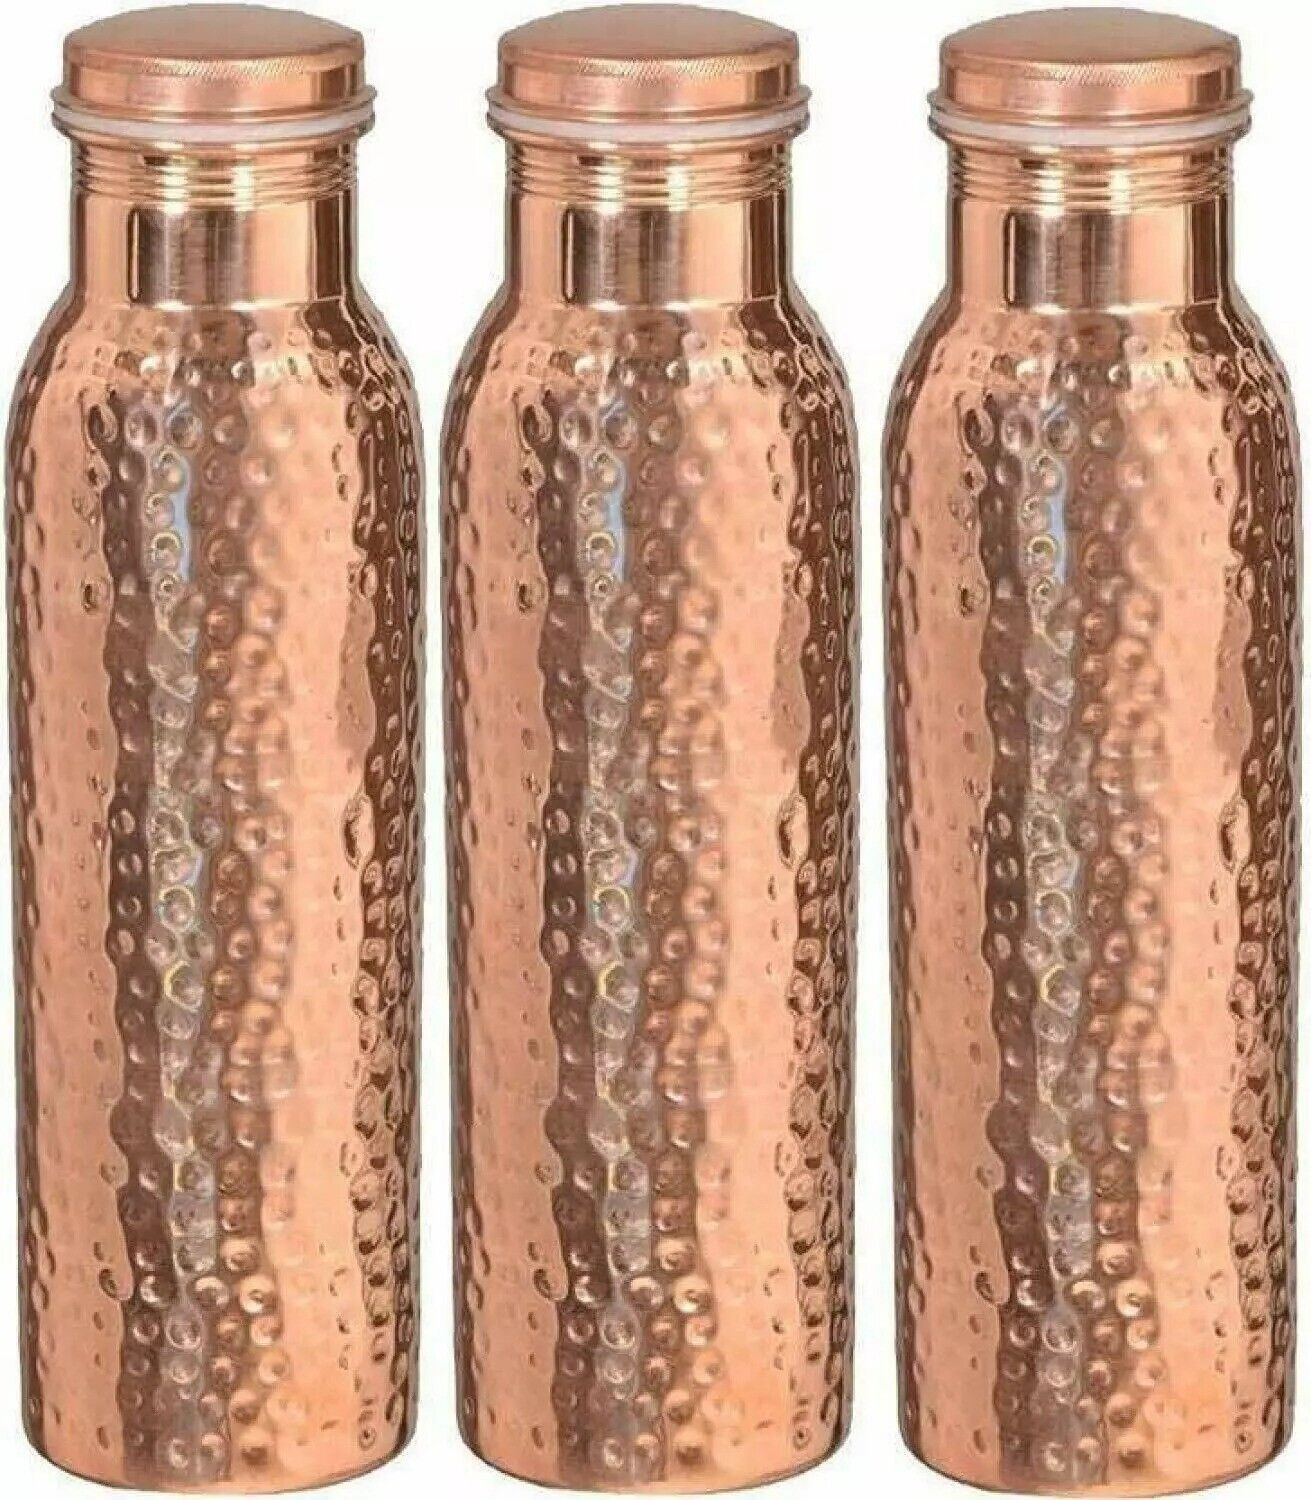 100% Pure Copper Hammered Water Bottle For Yoga Ayurveda Health Benefits 1000ml